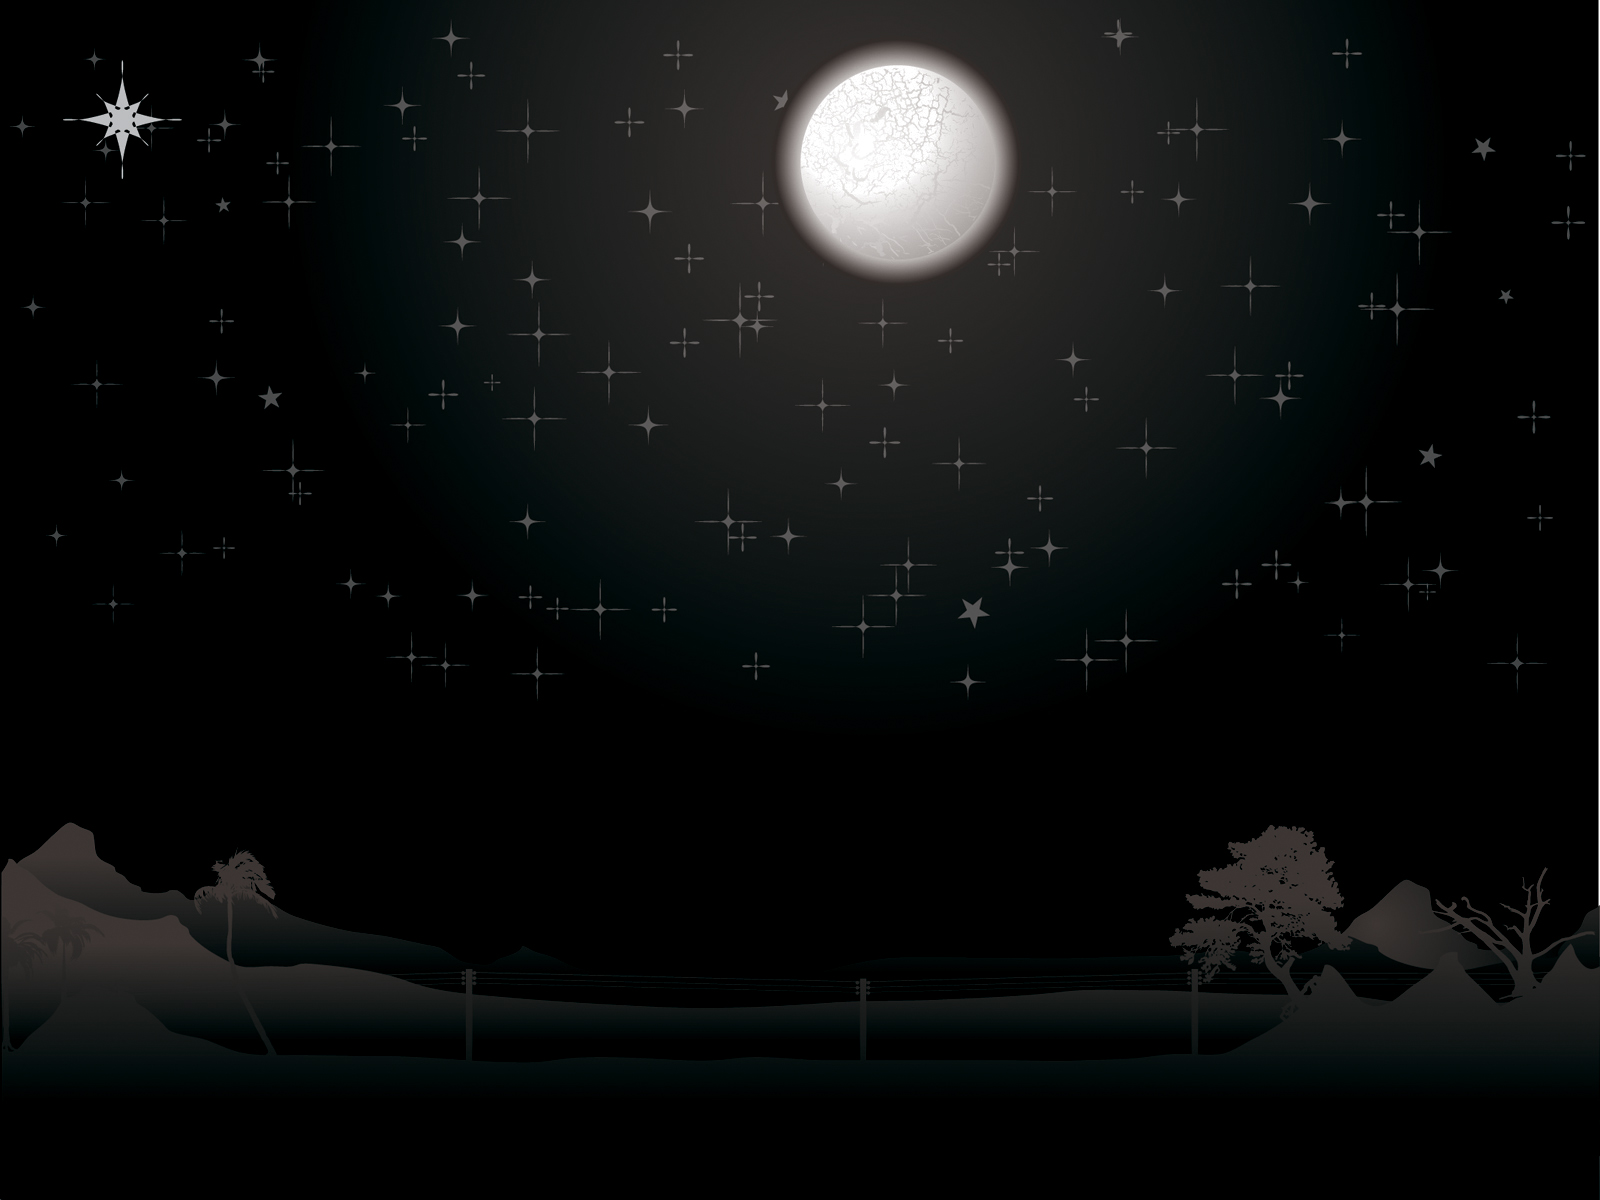 Night Moon and Stars Scene Powerpoint Templates - Black, Buildings &  Landmarks, Silver - Free PPT Backgrounds and Templates